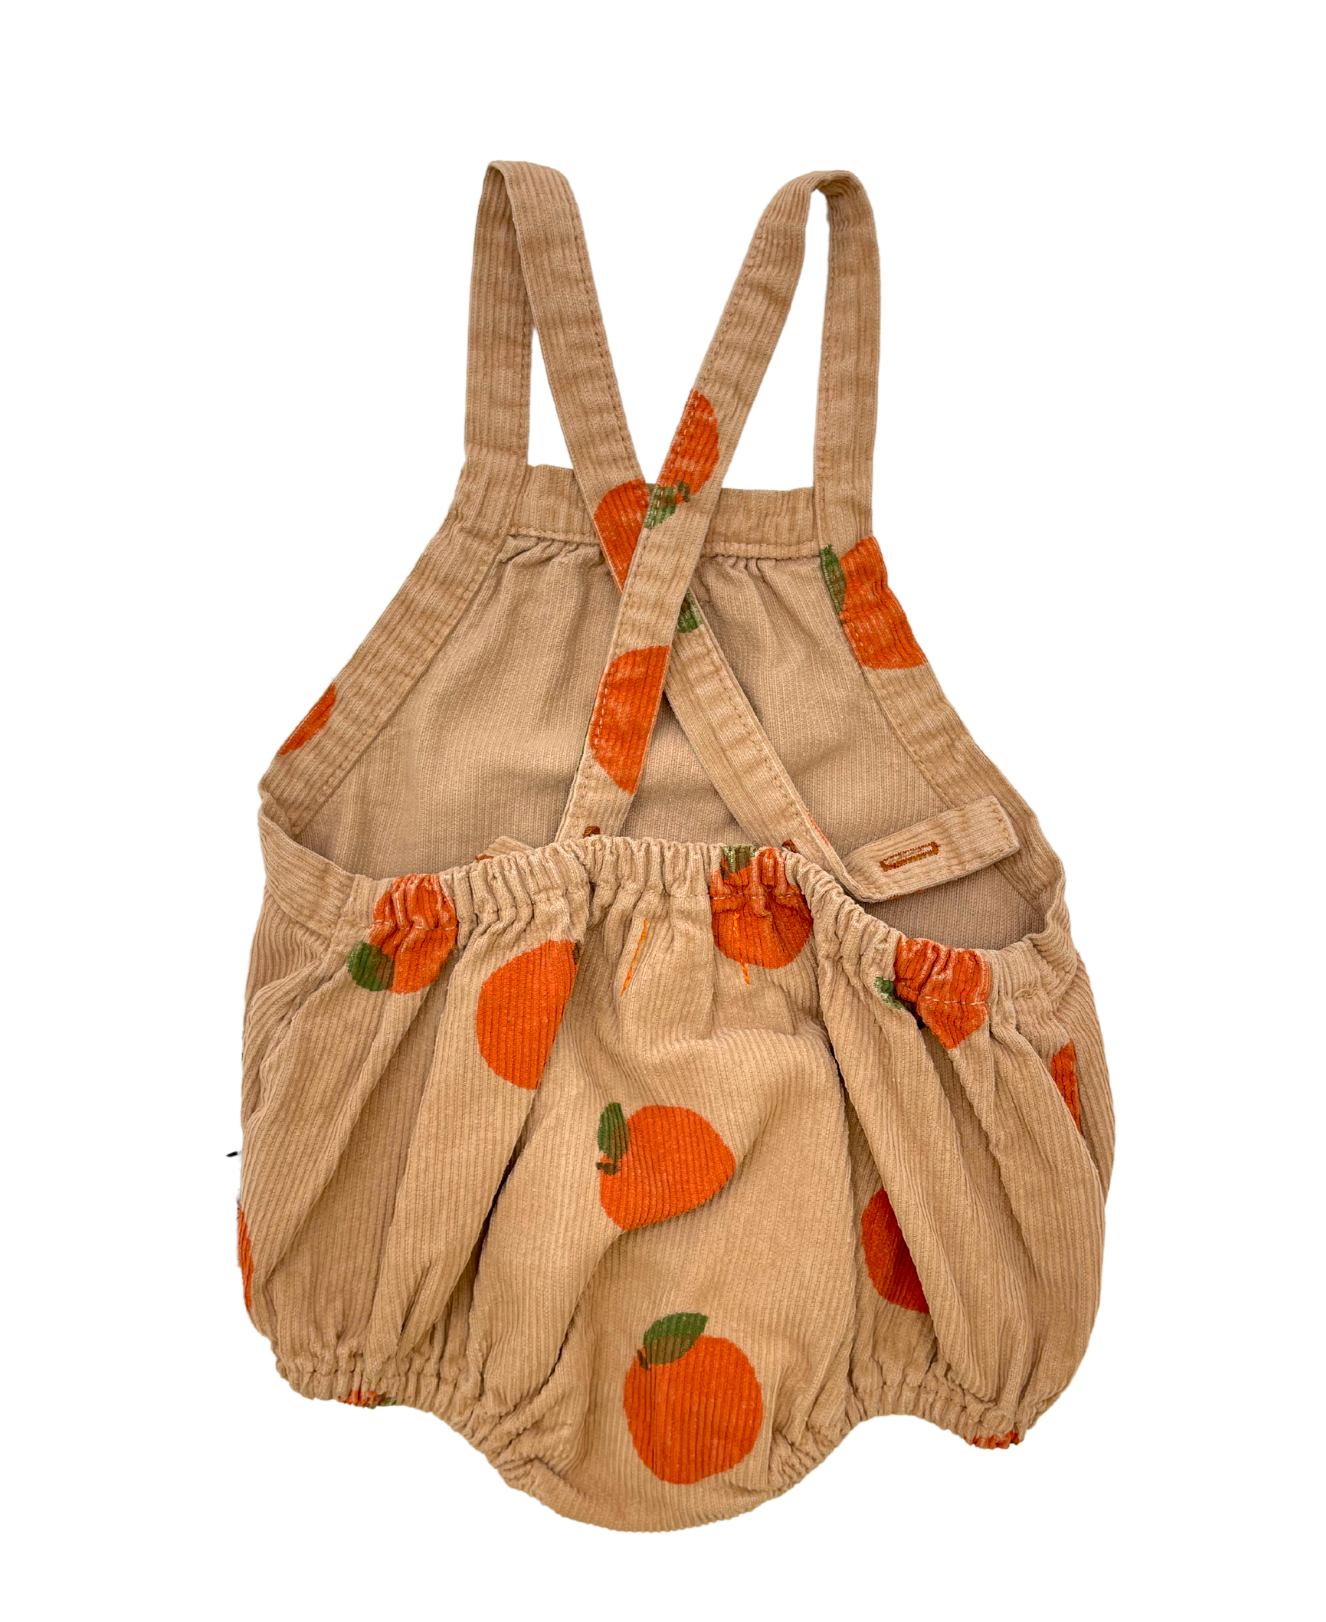 PIUPIUCHICK - Brown romper with oranges - 1 year old